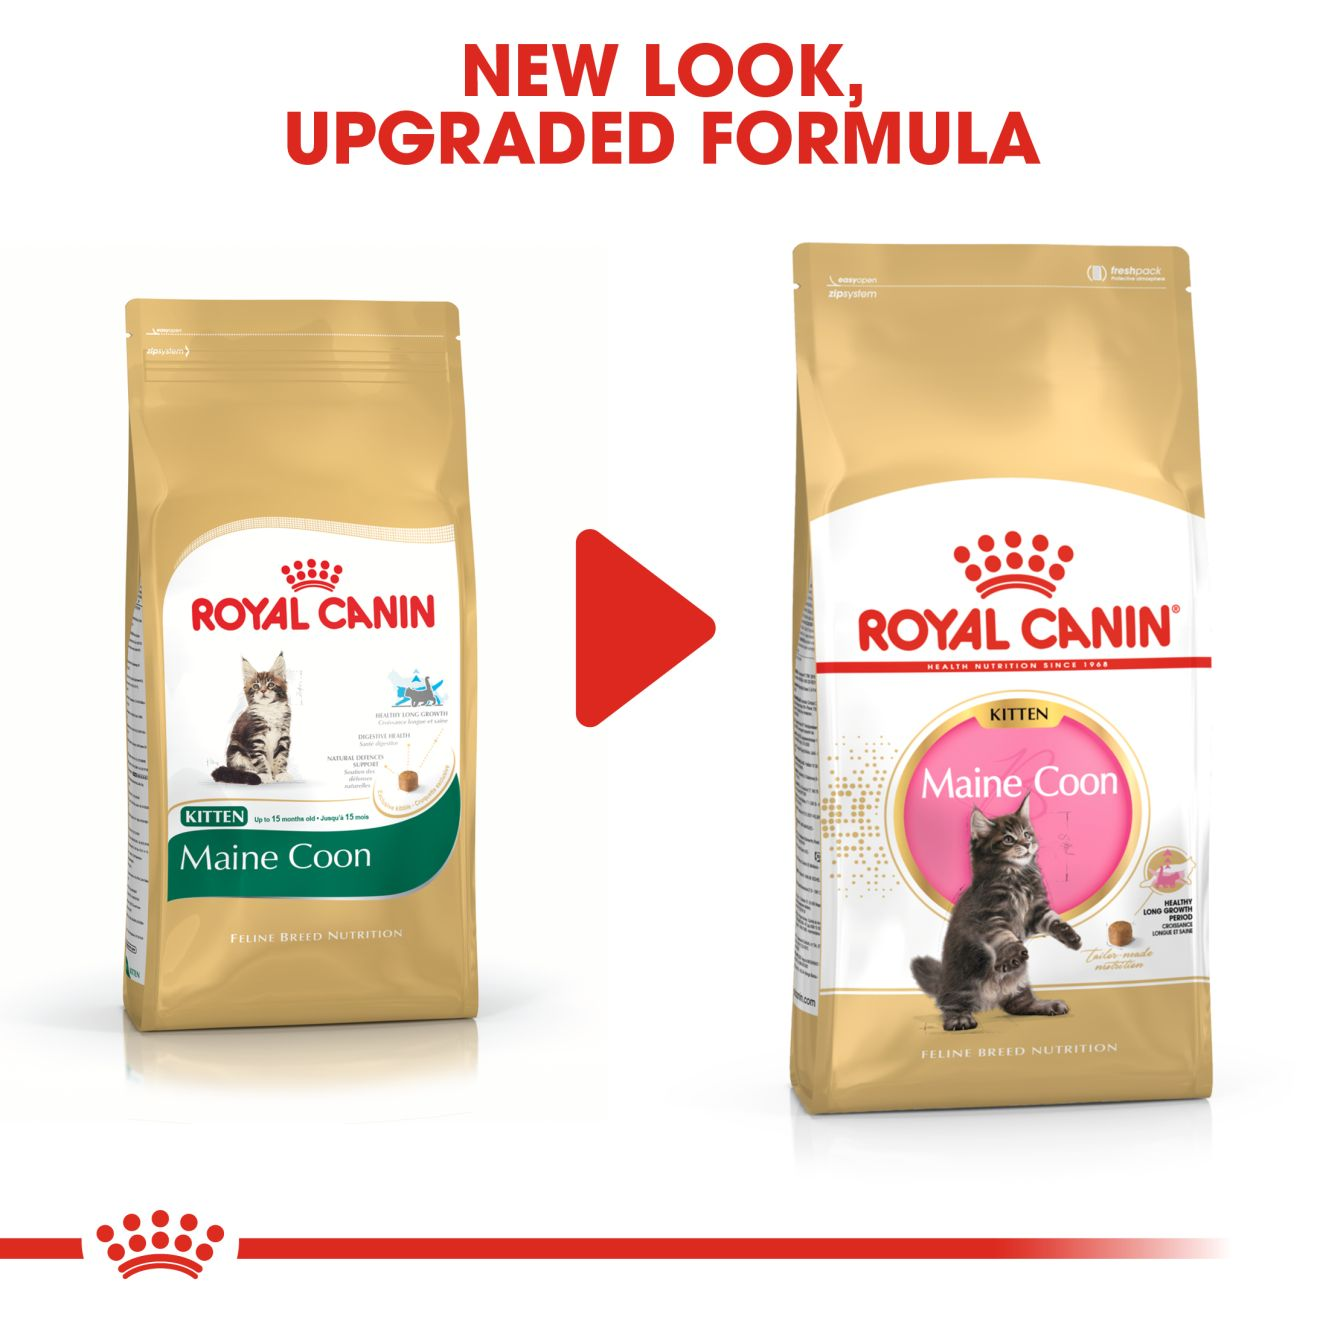 royal canin maine coon kitten food